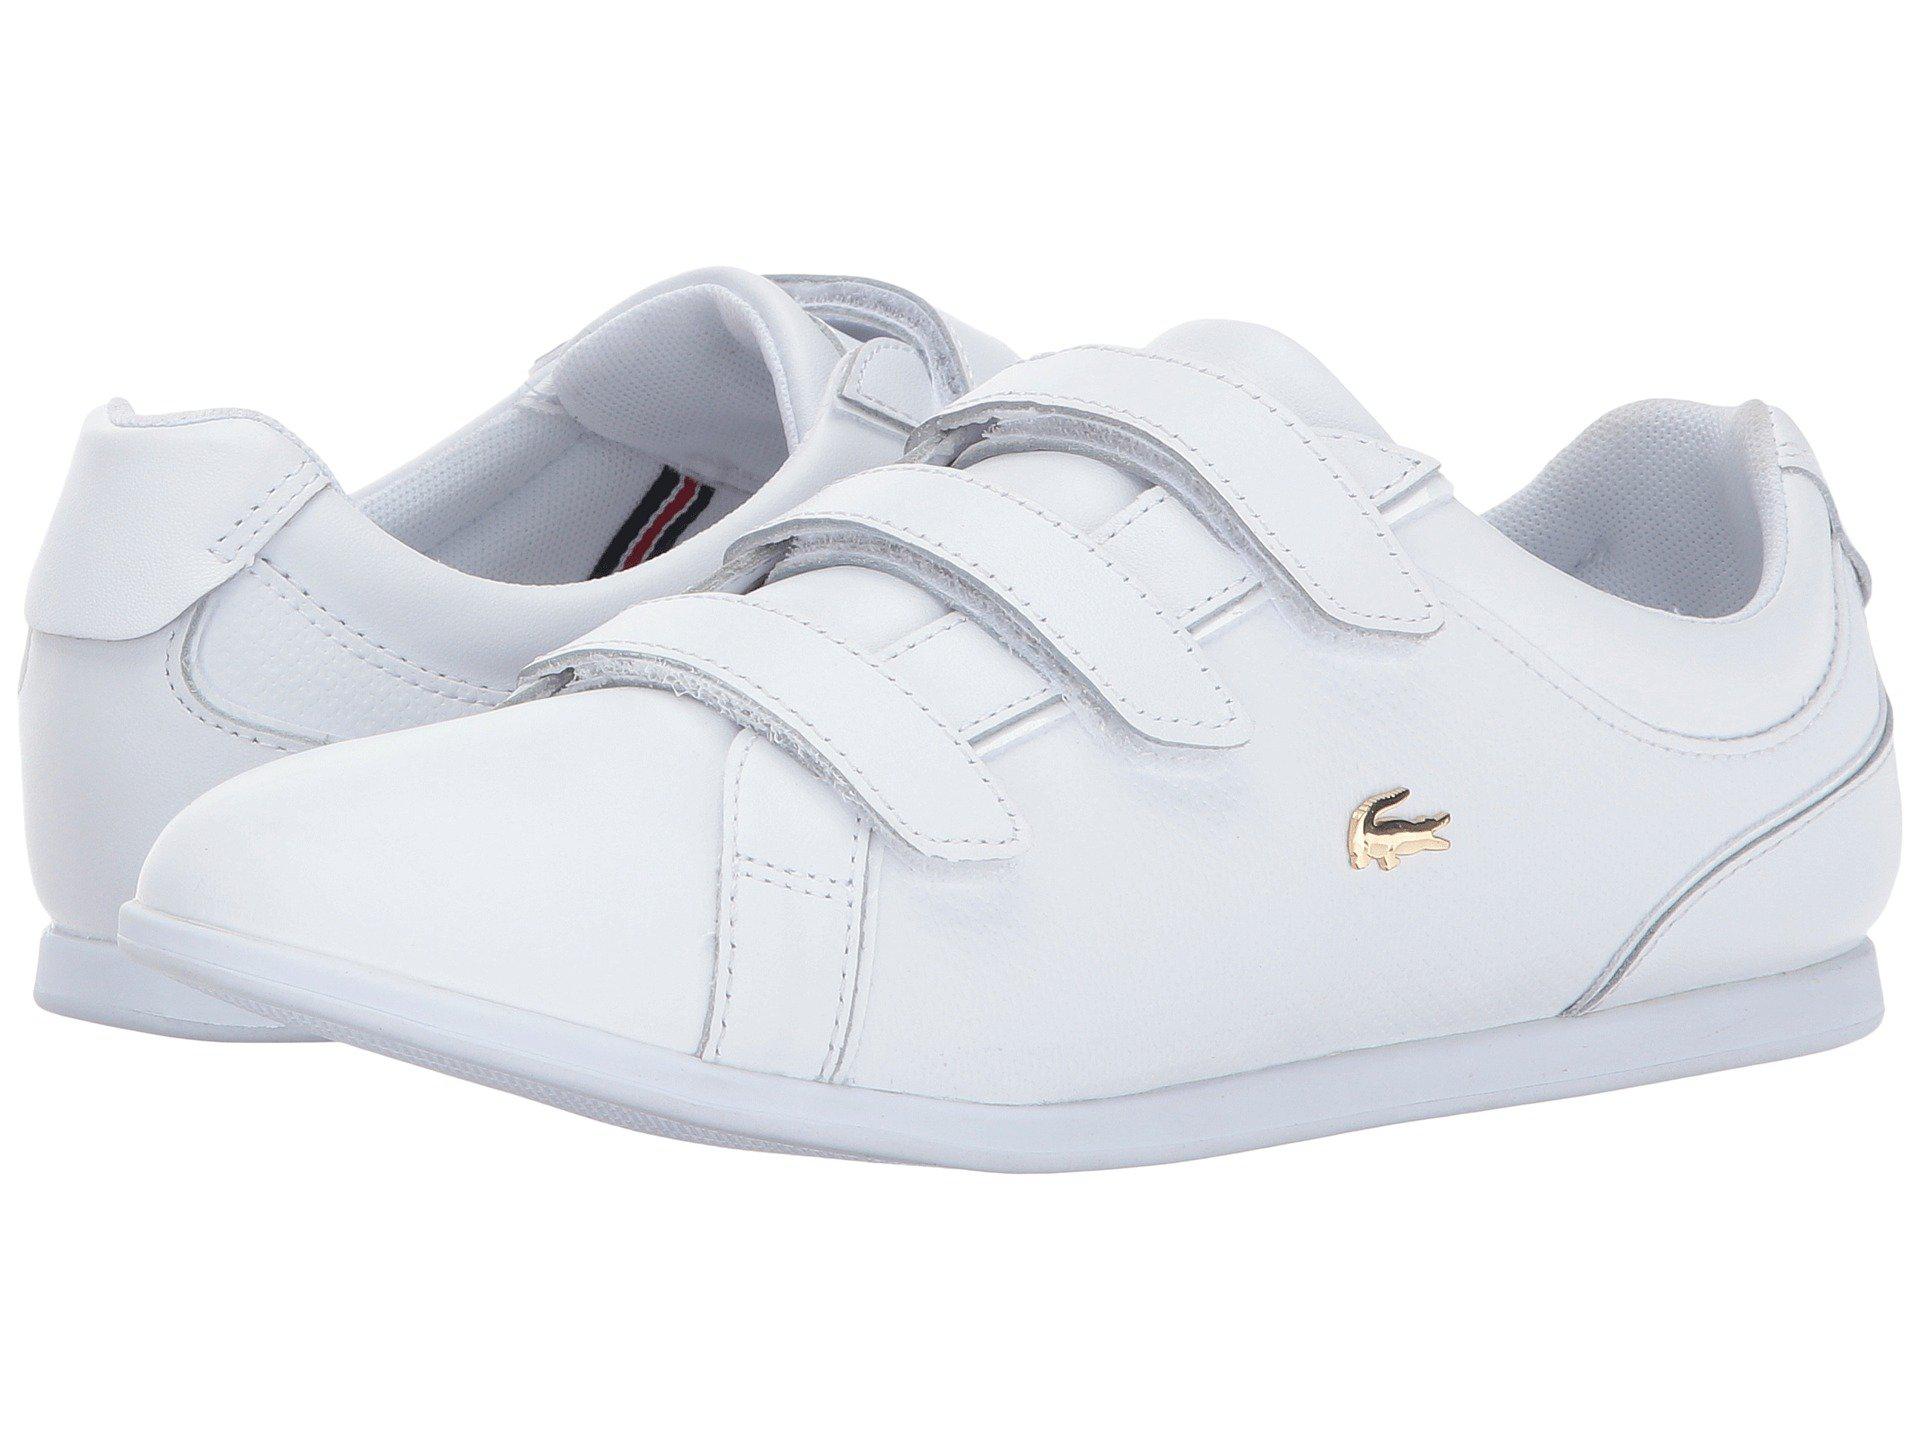 lacoste shoes with strap - 53% OFF 